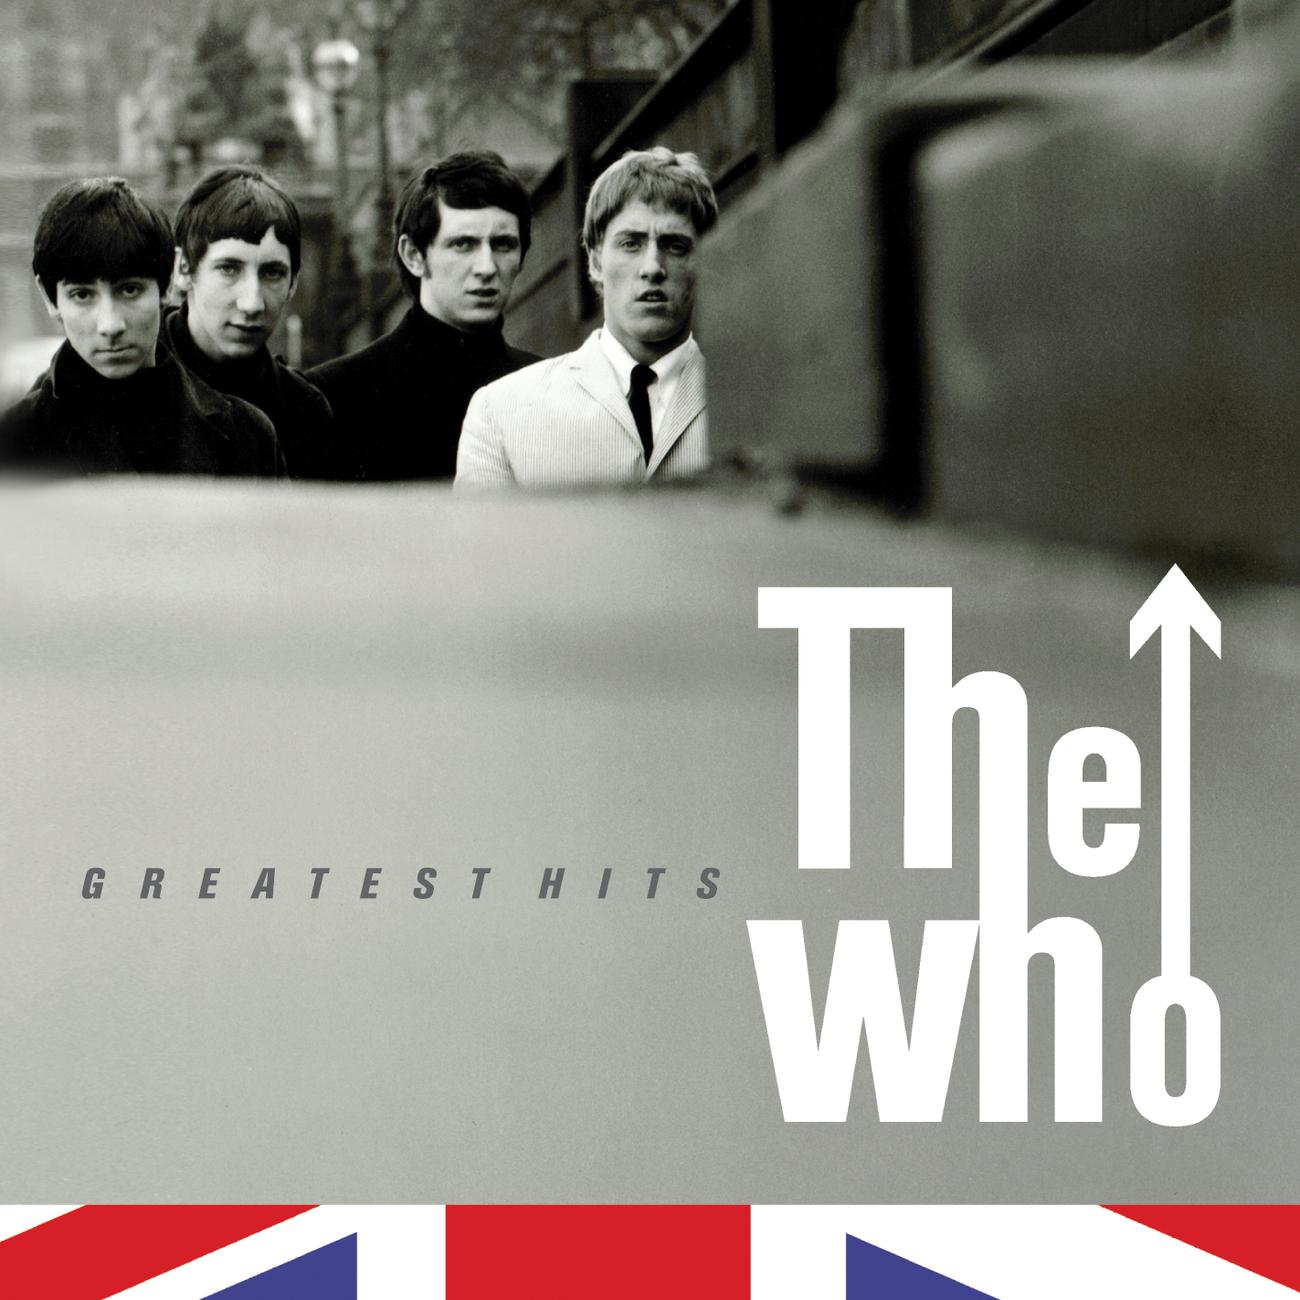 The who collection the who. The who 1965. Группа the who. The who альбомы. The who фотоальбомов.